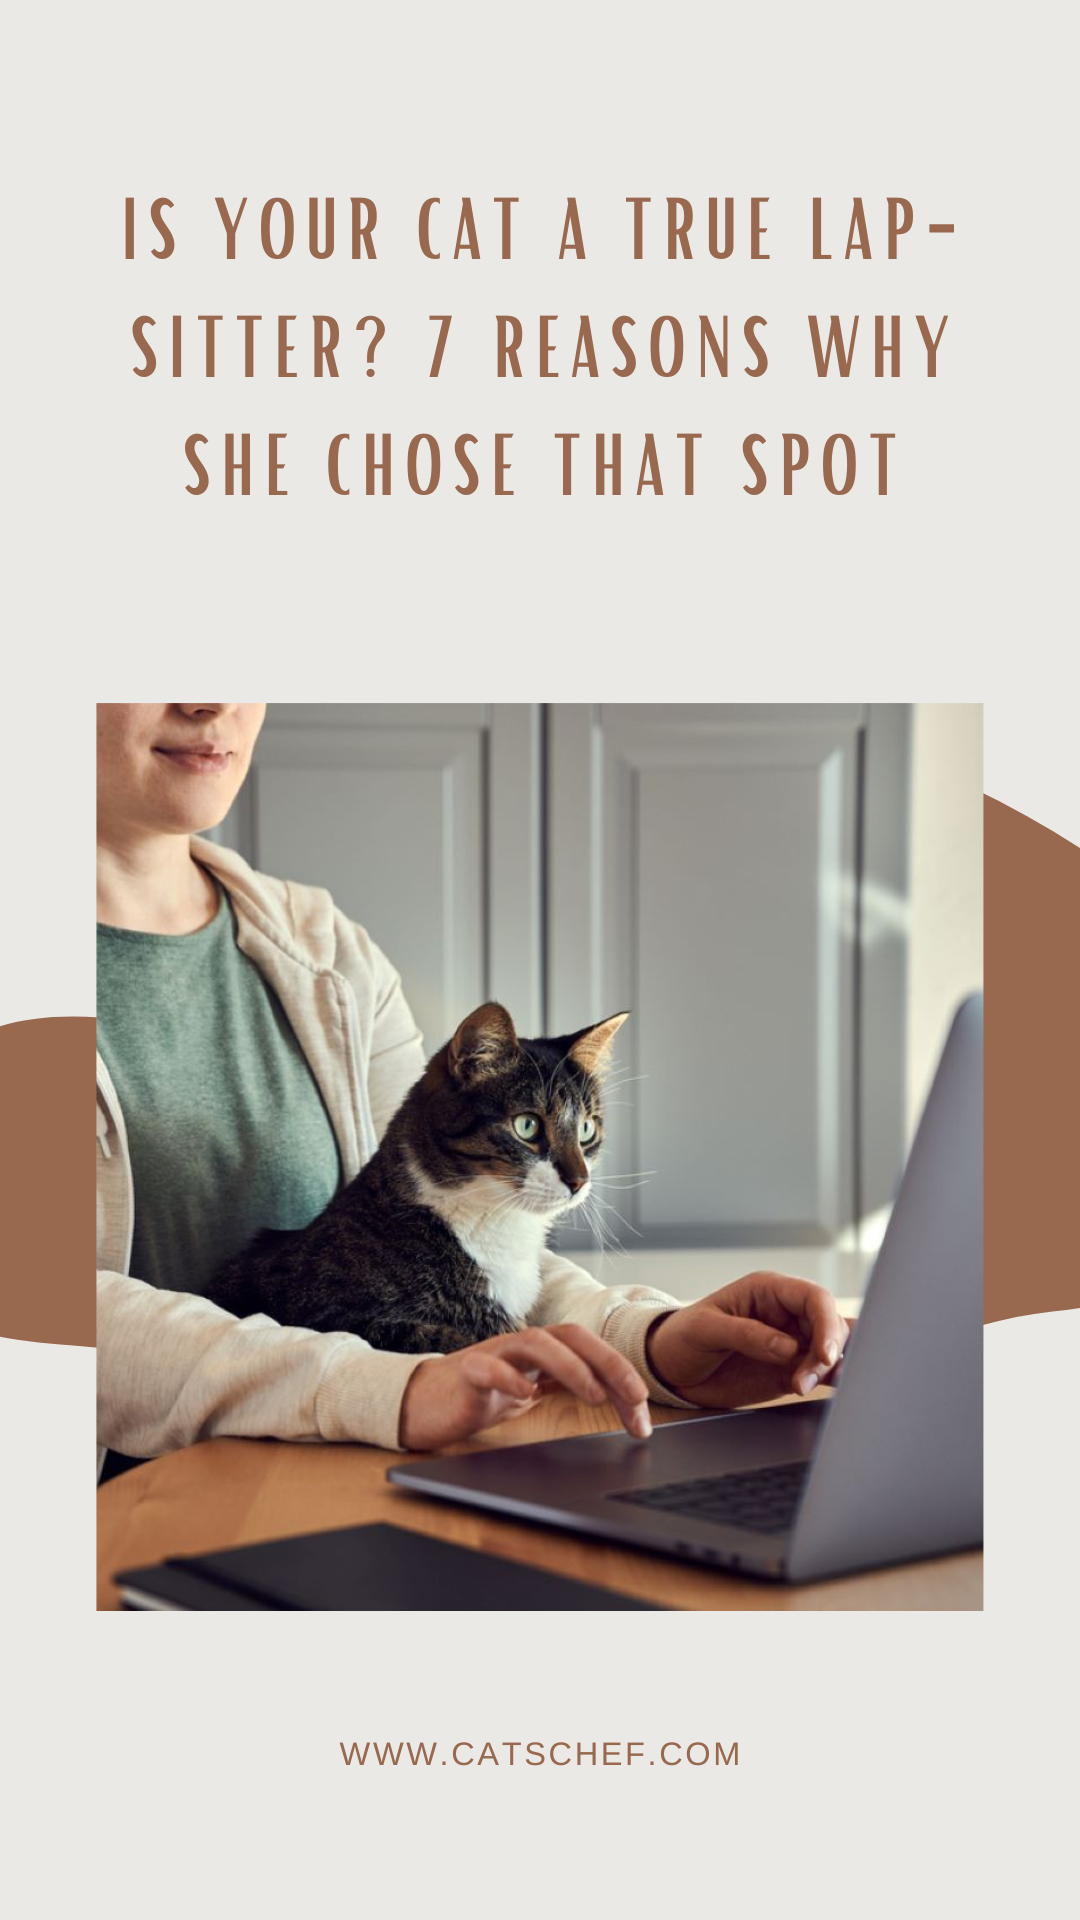 Is Your Cat A True Lap-Sitter? 7 Reasons Why She Chose That Spot